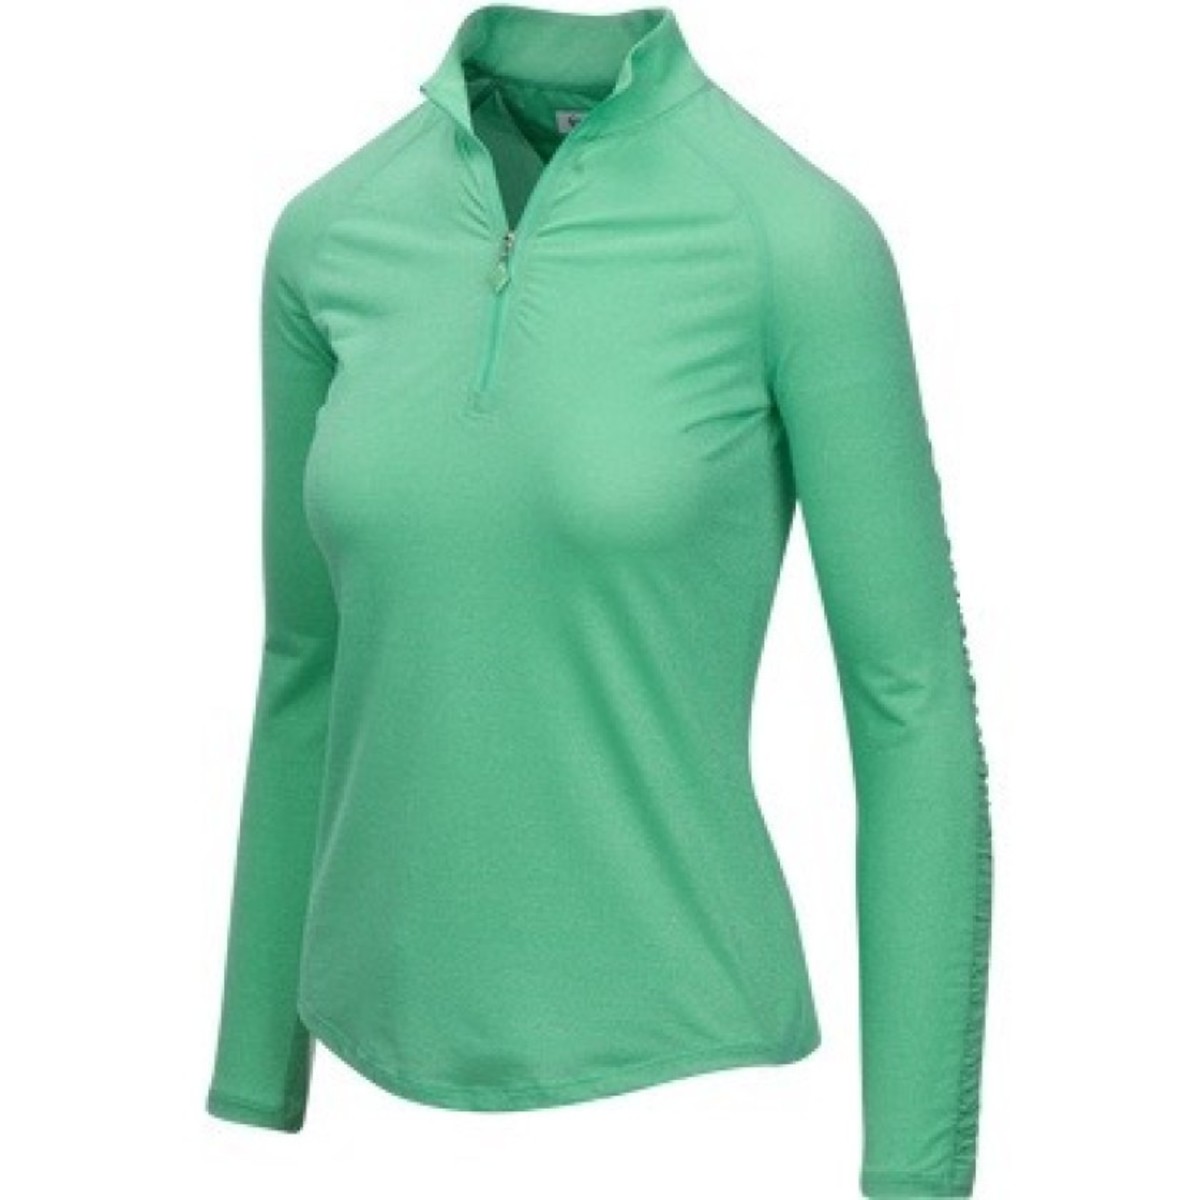 One of the newest arrivals to Greg Norman Collection's women's line is the stylish panel-long sleeve, quarter-zip, mock neck top.